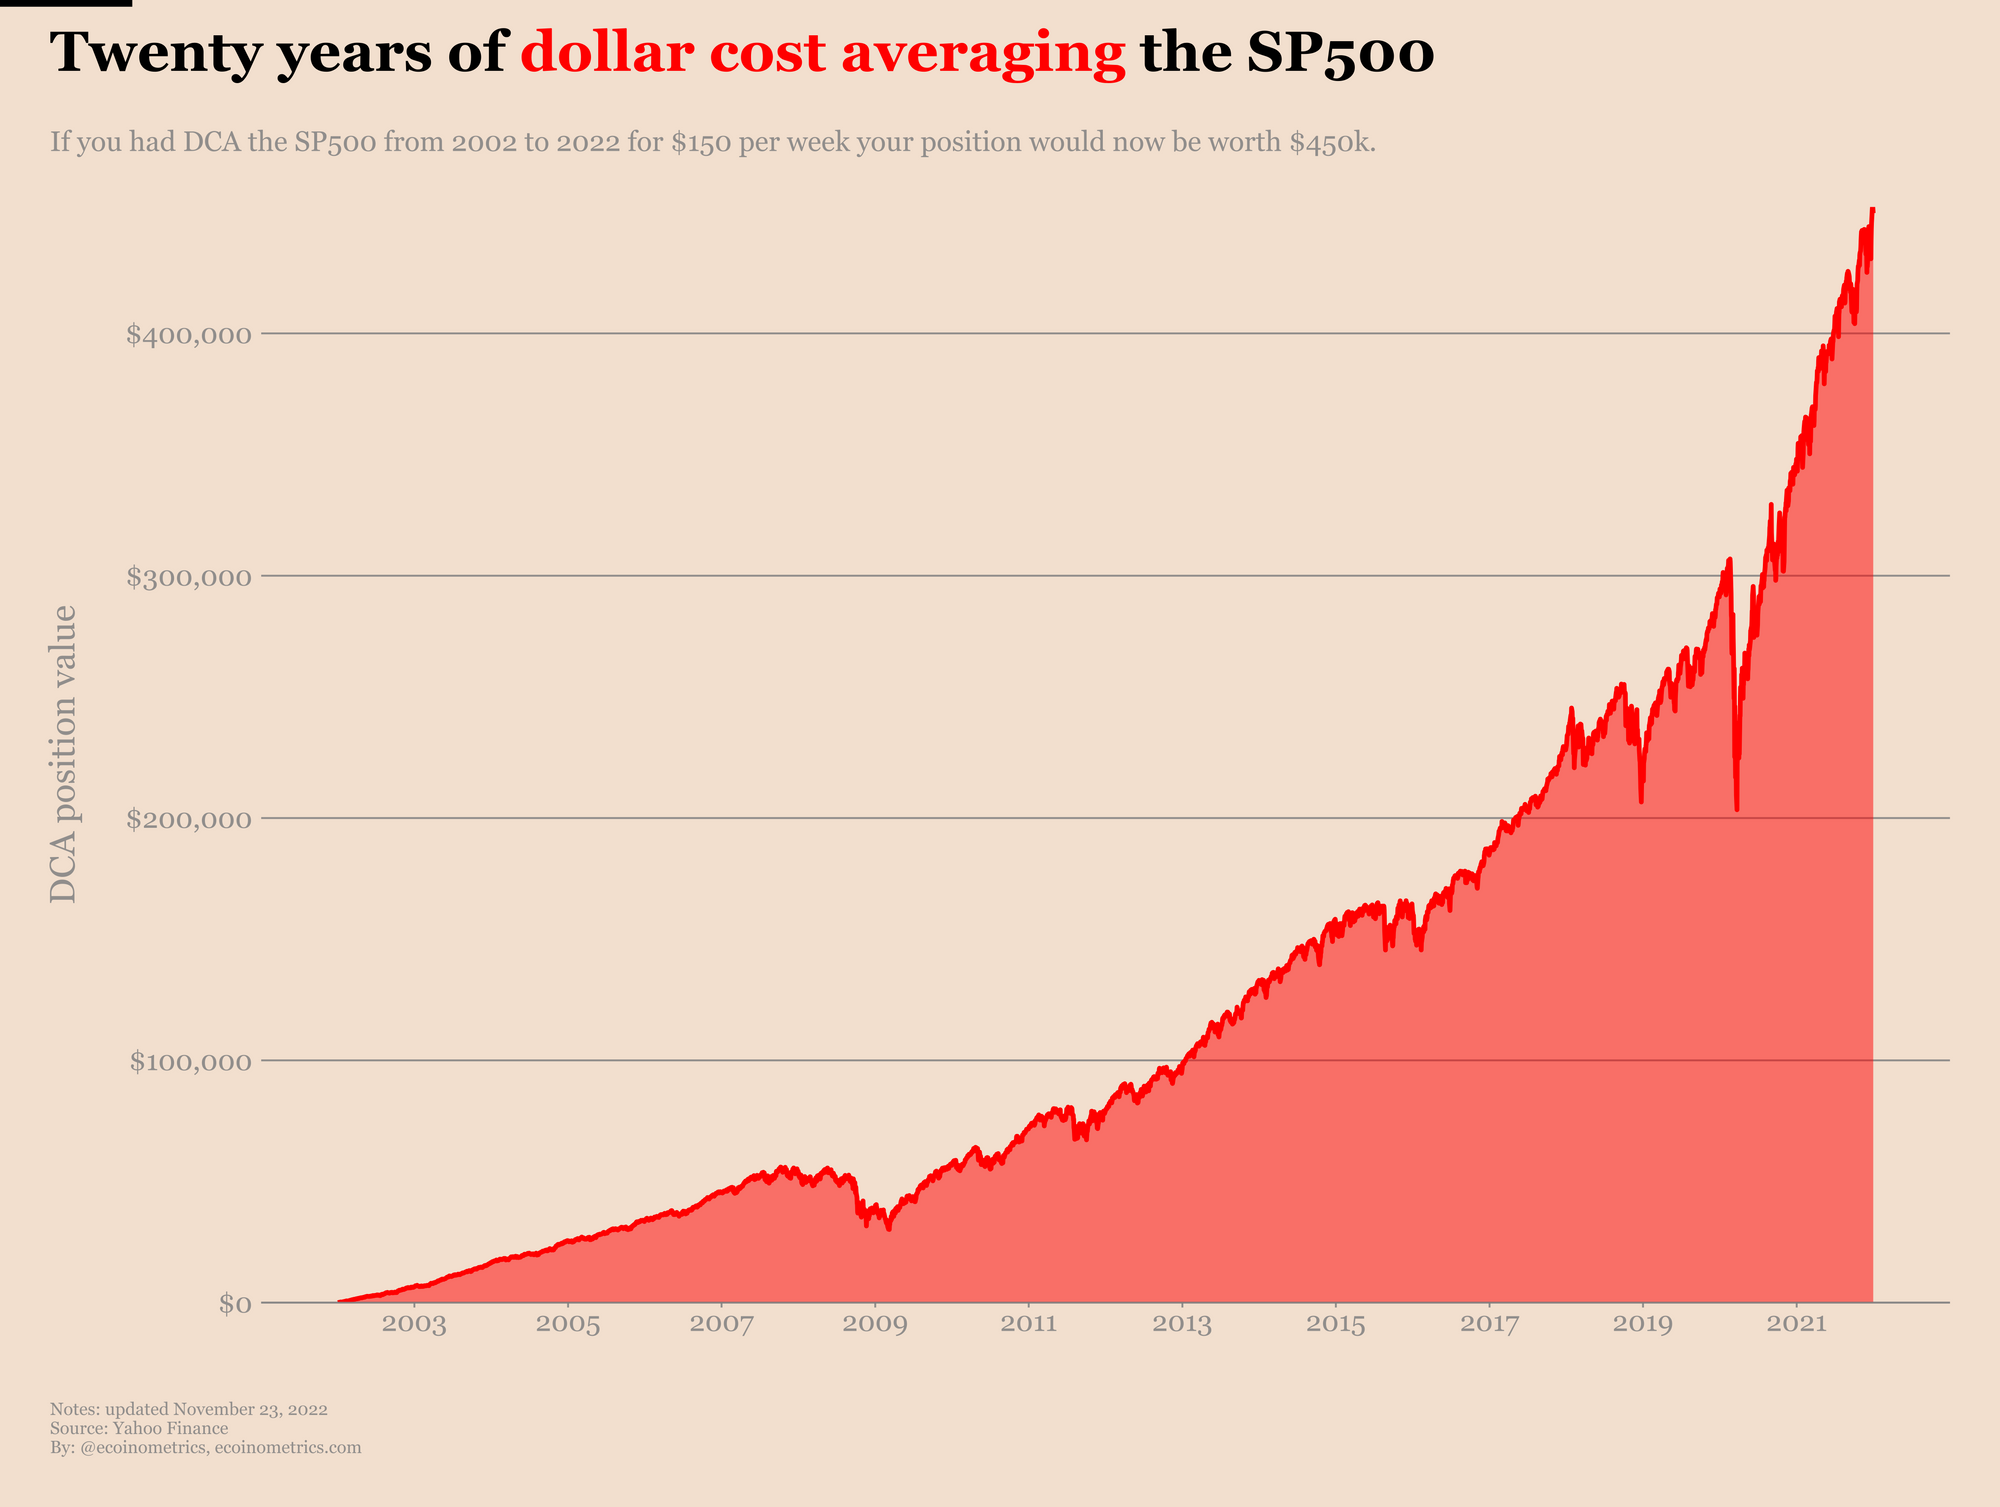 How much is your position worth after dollar cost averaging the stock market for 20 years?